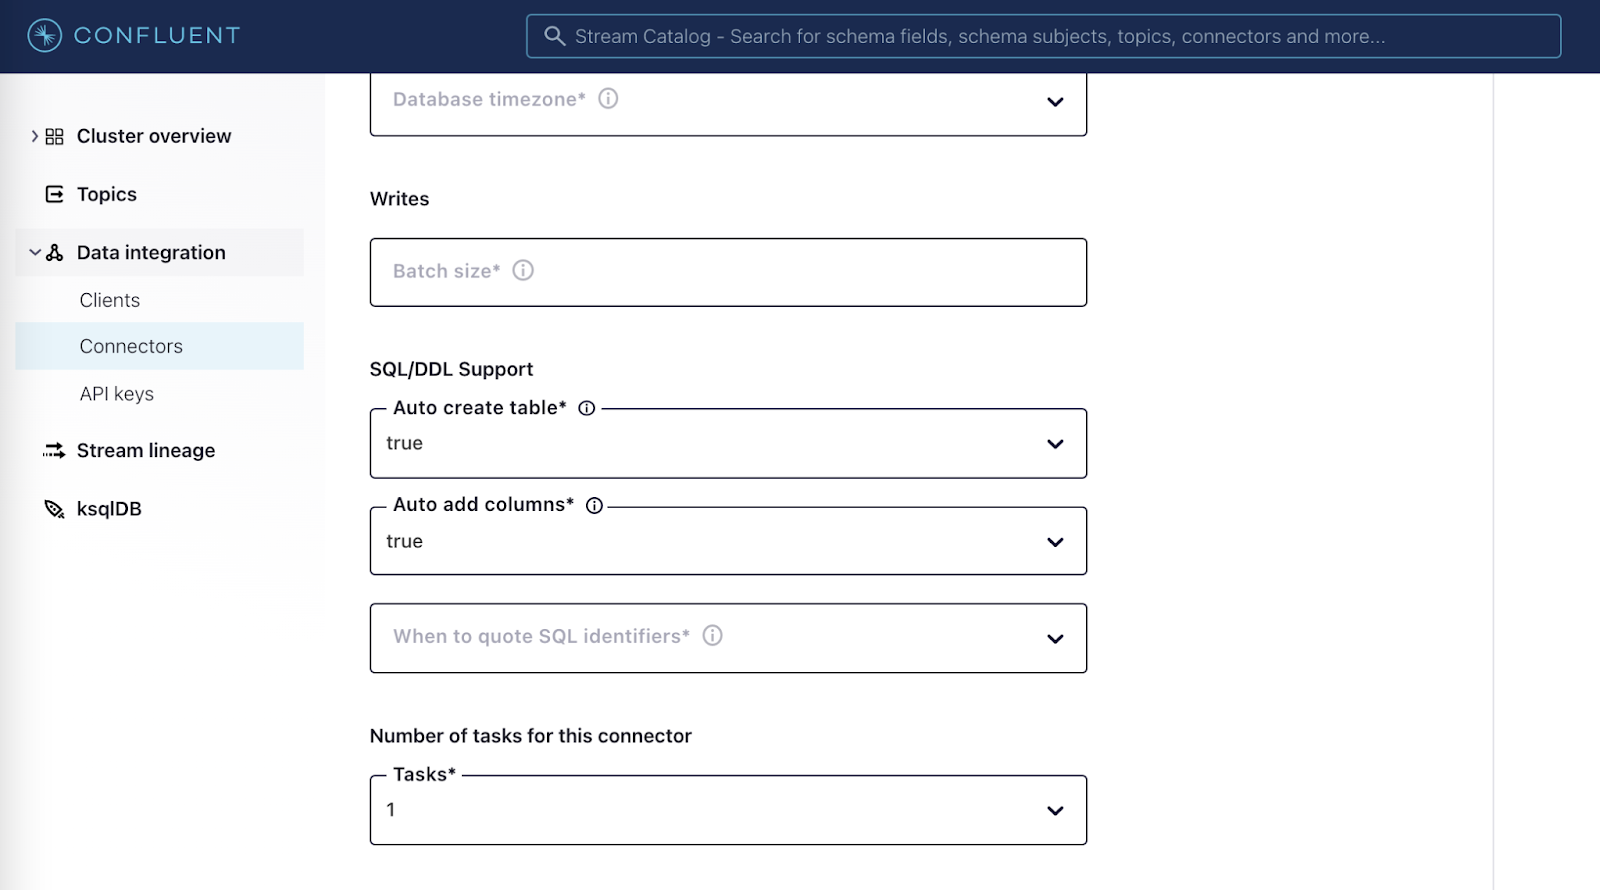 Enter your credentials and Azure SQL warehouse connection details